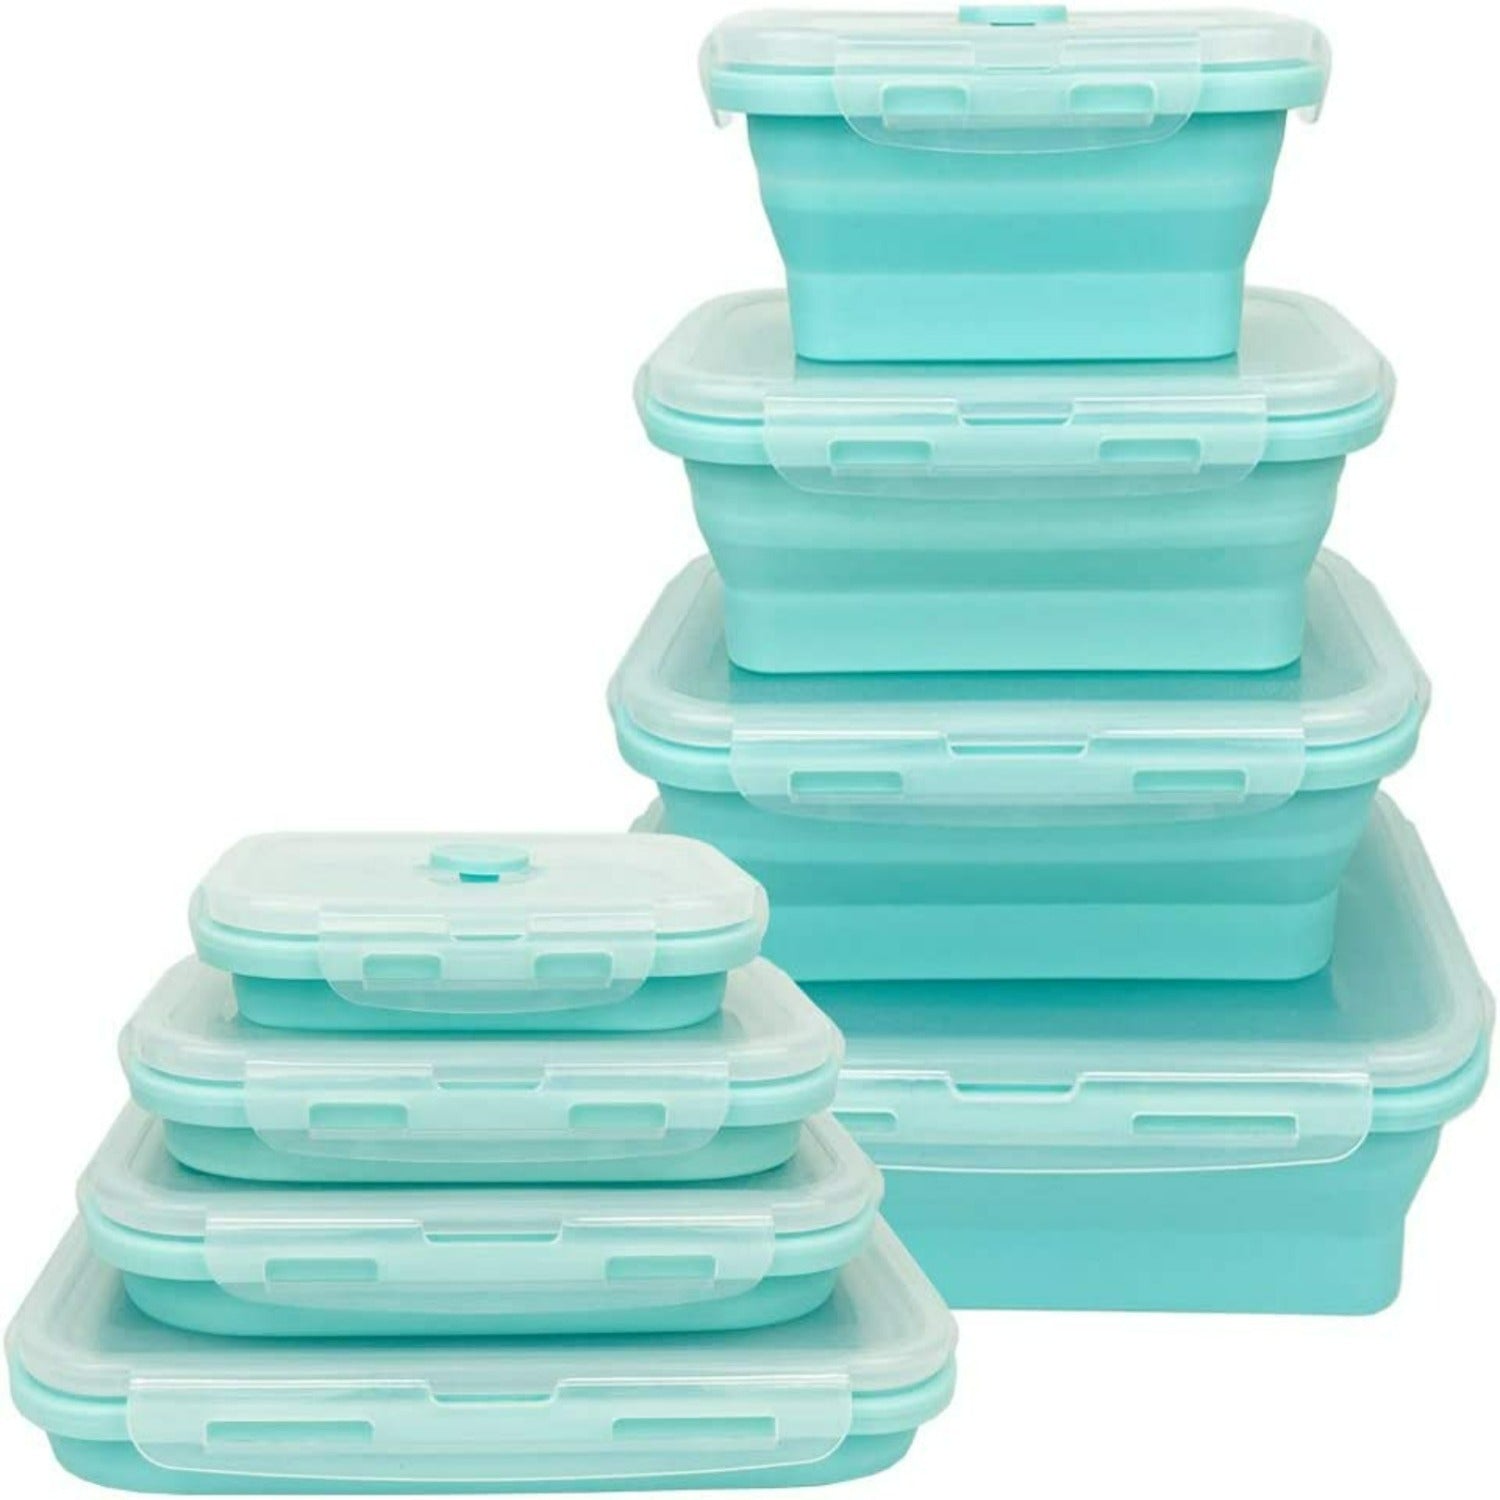 Collapsible Space Saving Food Storage Containers Set- 4 Pcs Blue